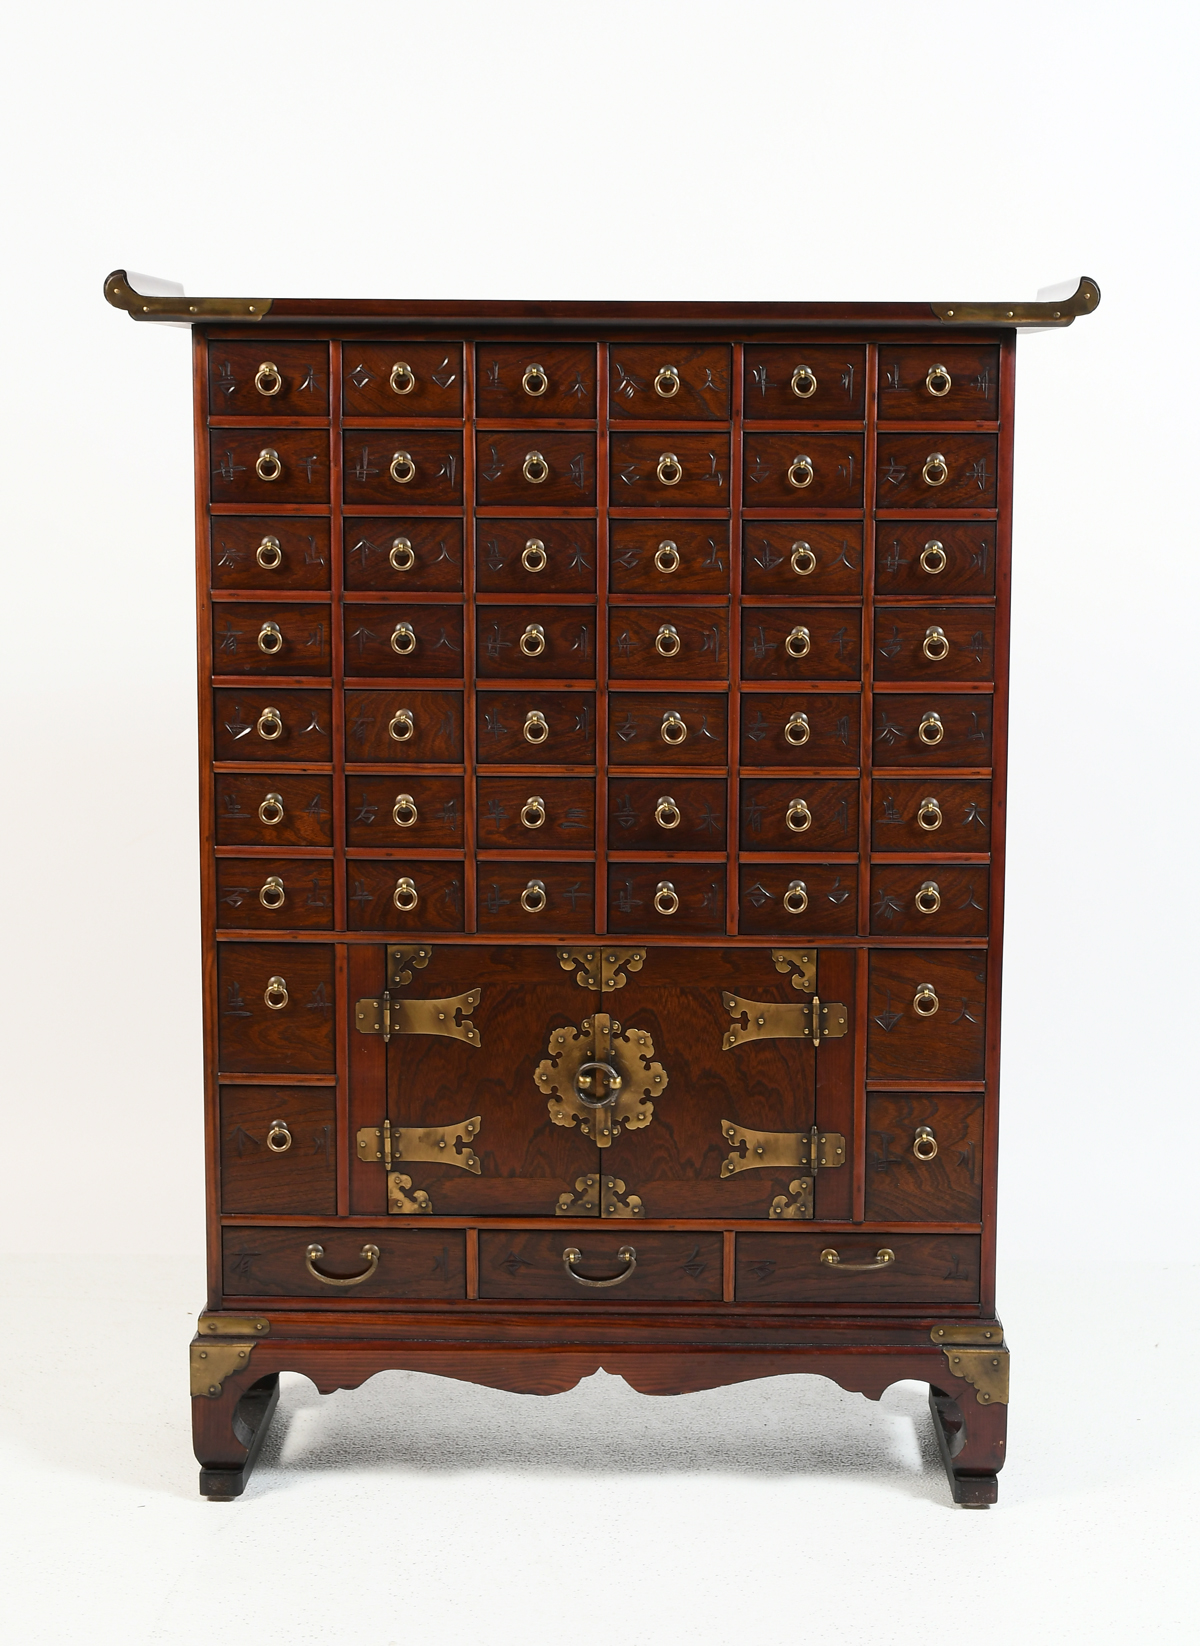 20TH-CENTURY CHINESE SPICE CABINET: